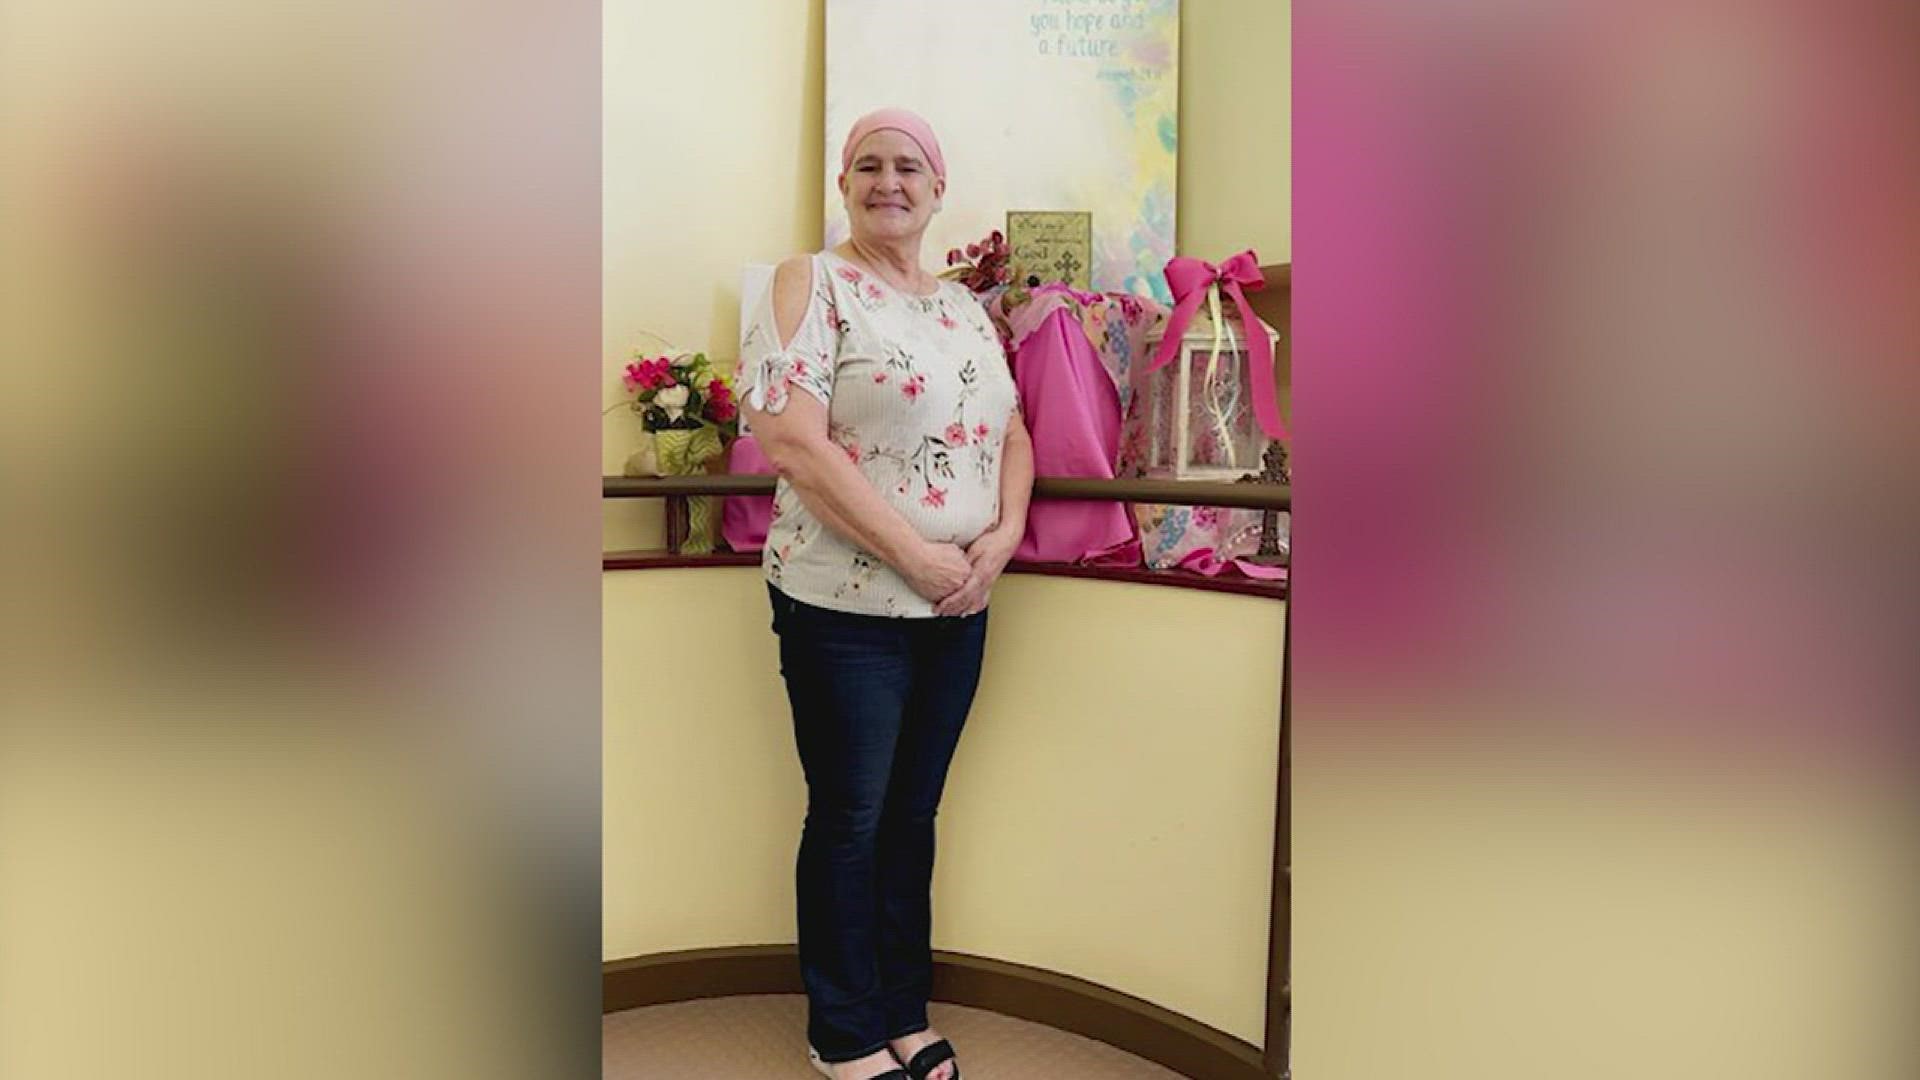 After 61-year-old Anita Dowers noticed some changes in her breast, her daughter registered her for the Gift of Life program to help get some answers.